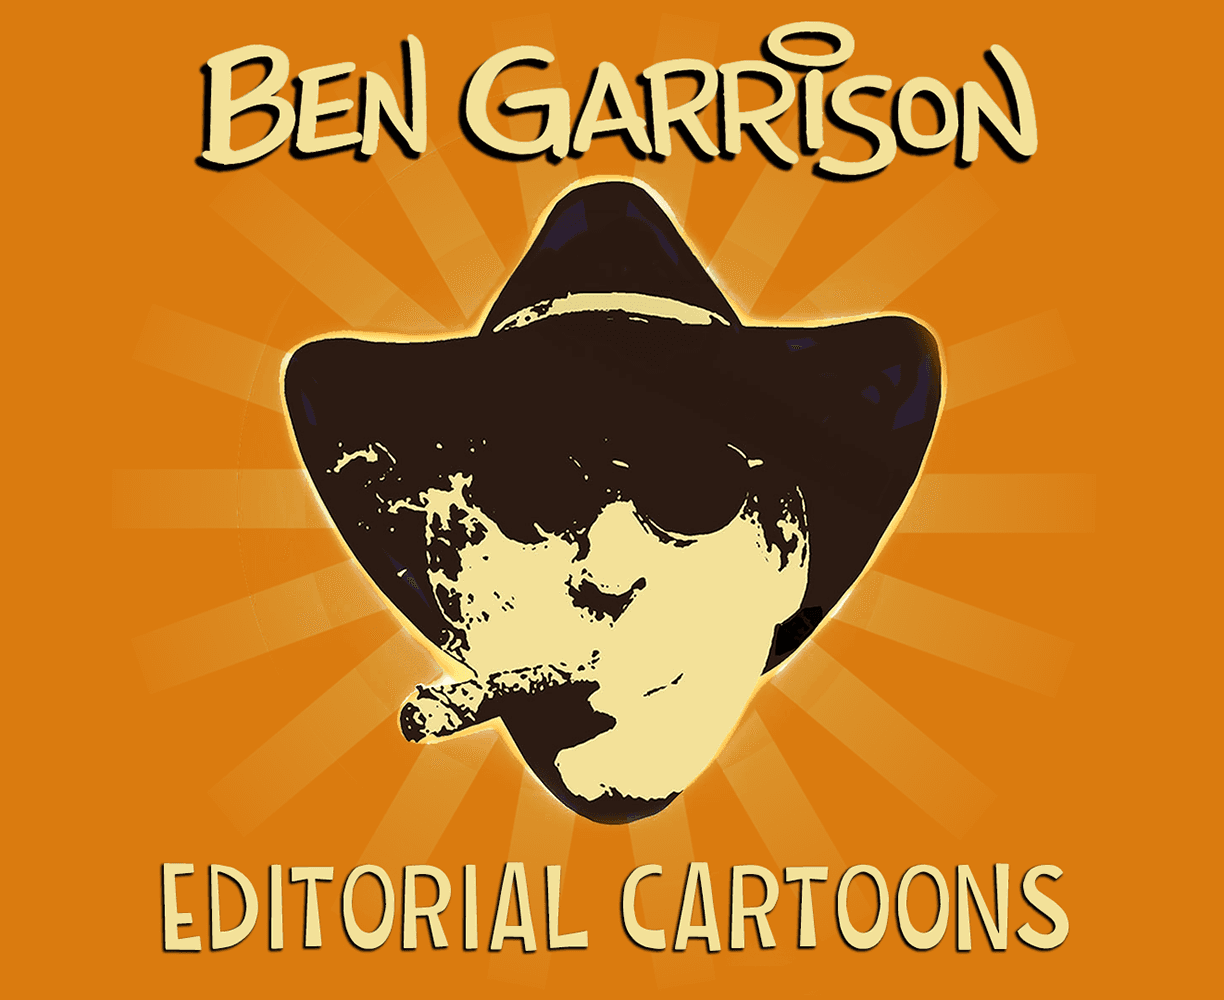 The cover art for the episode Joe Runs Again from the comics series Ben Garrison, which is number 139 in the series